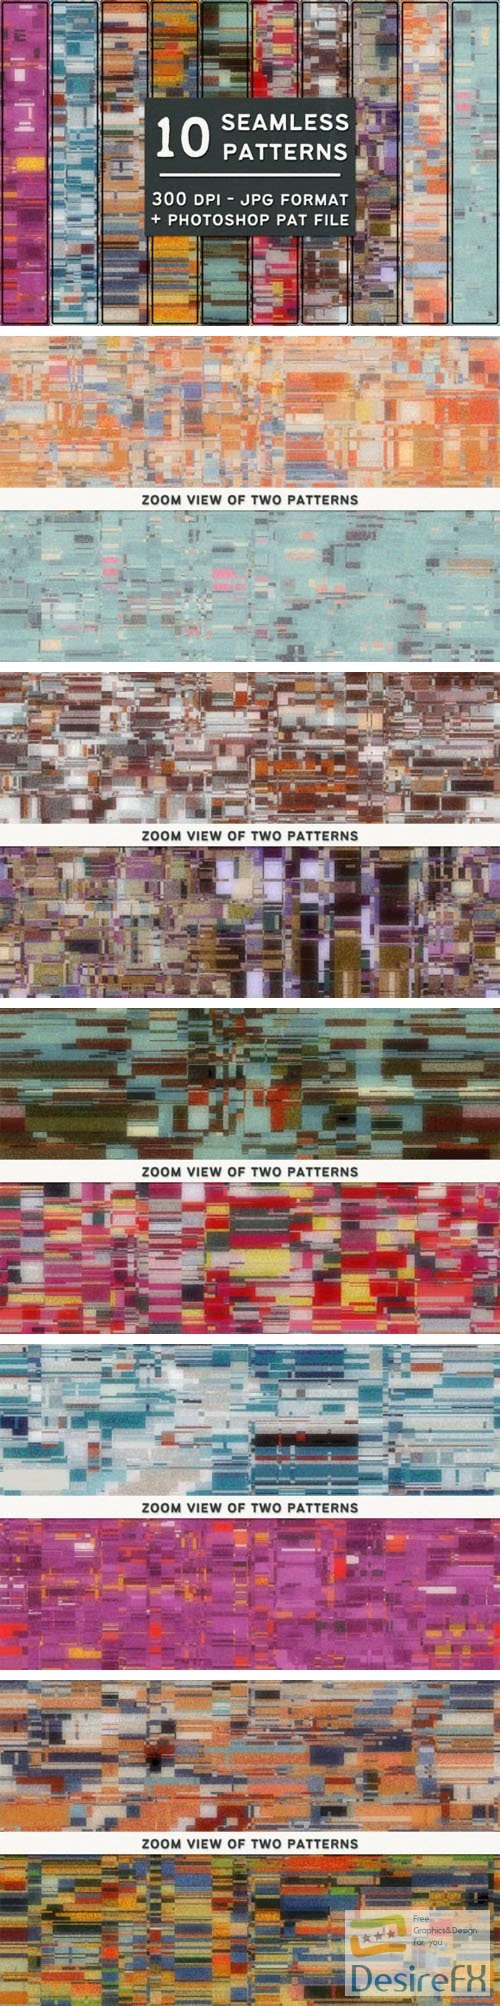 10 Vintage Glitch Seamless Patterns & Textures for Photoshop